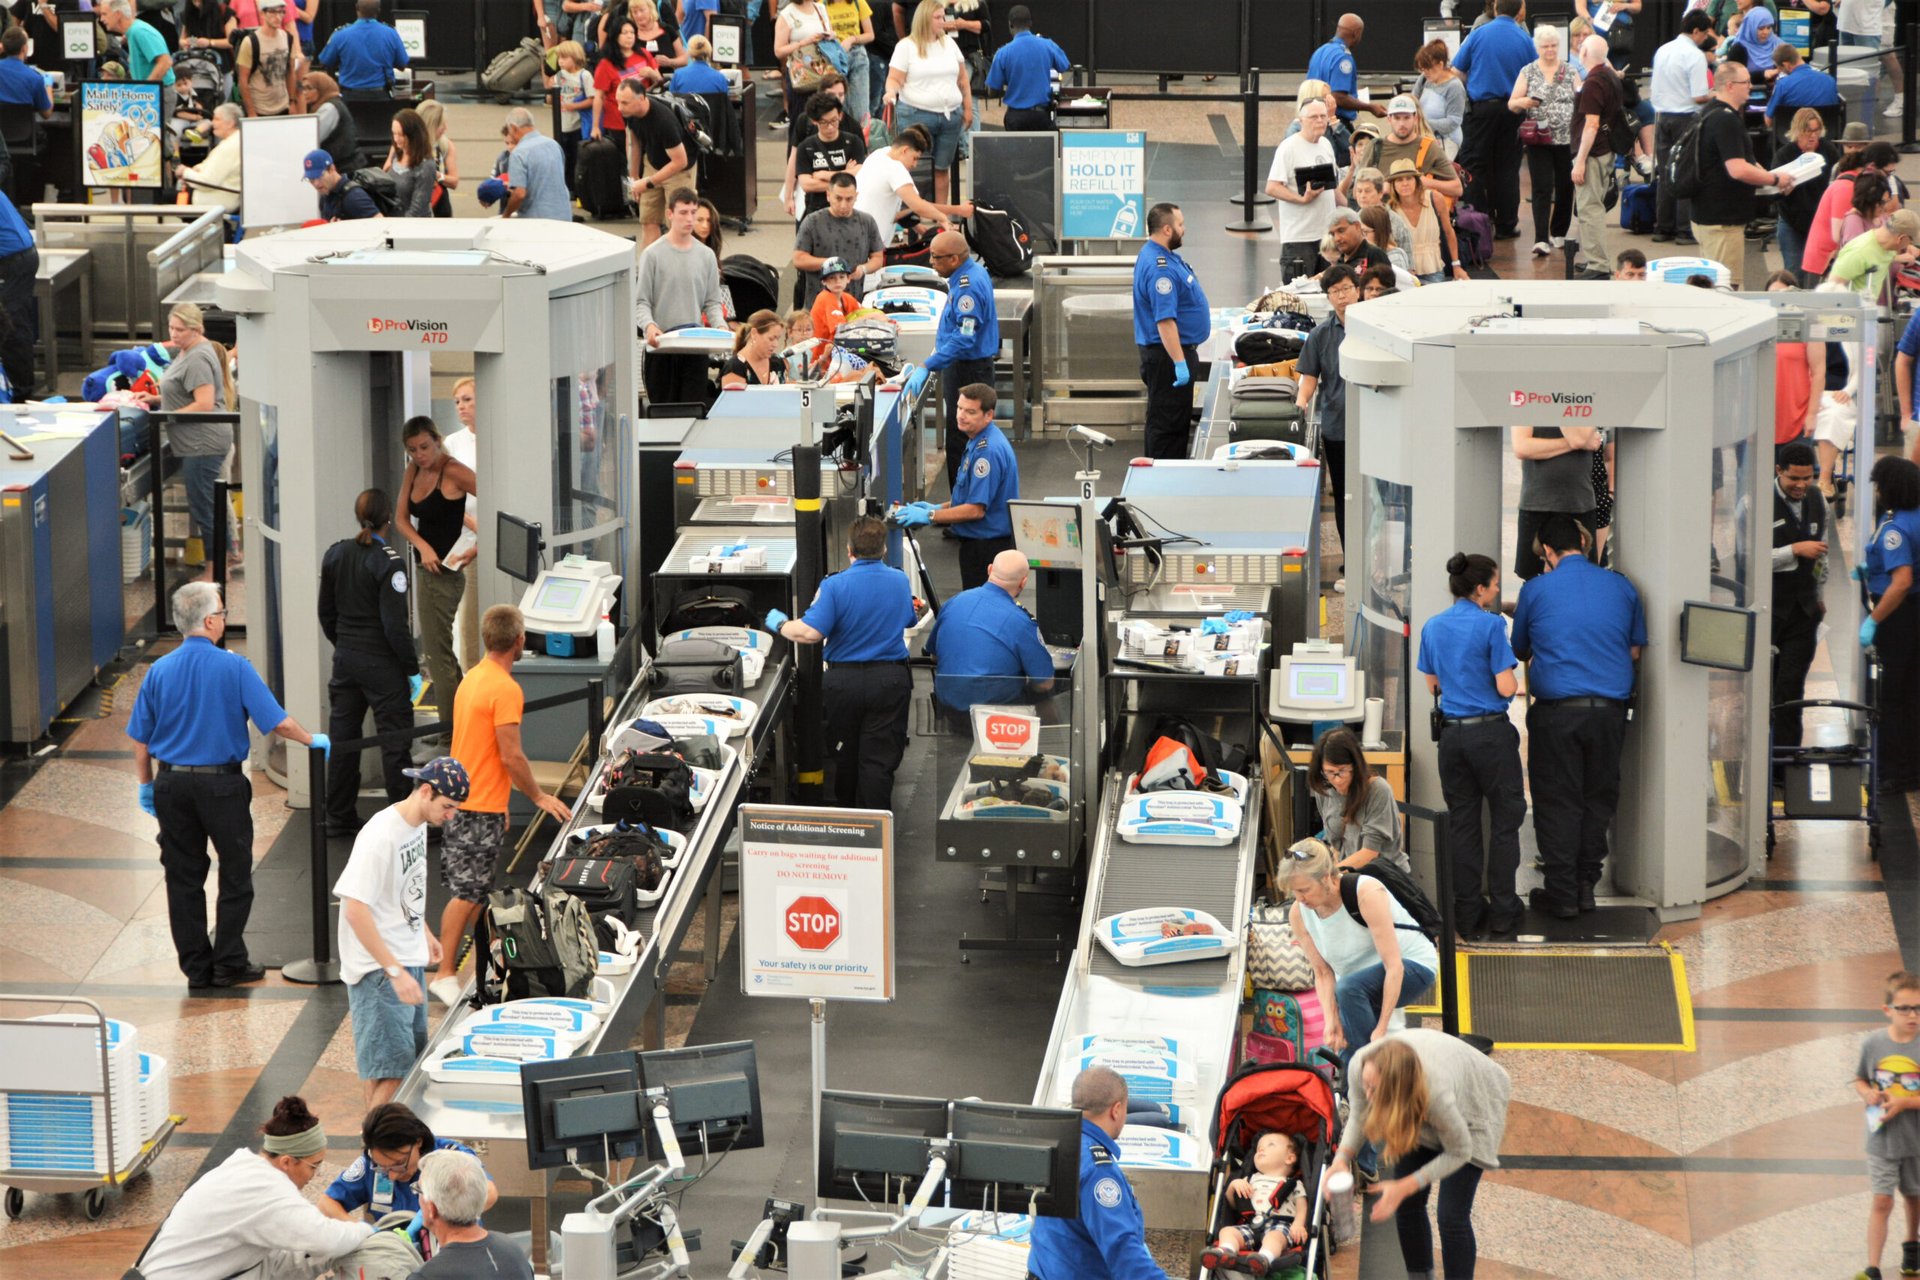 TSA security checkpoint lines at the airport